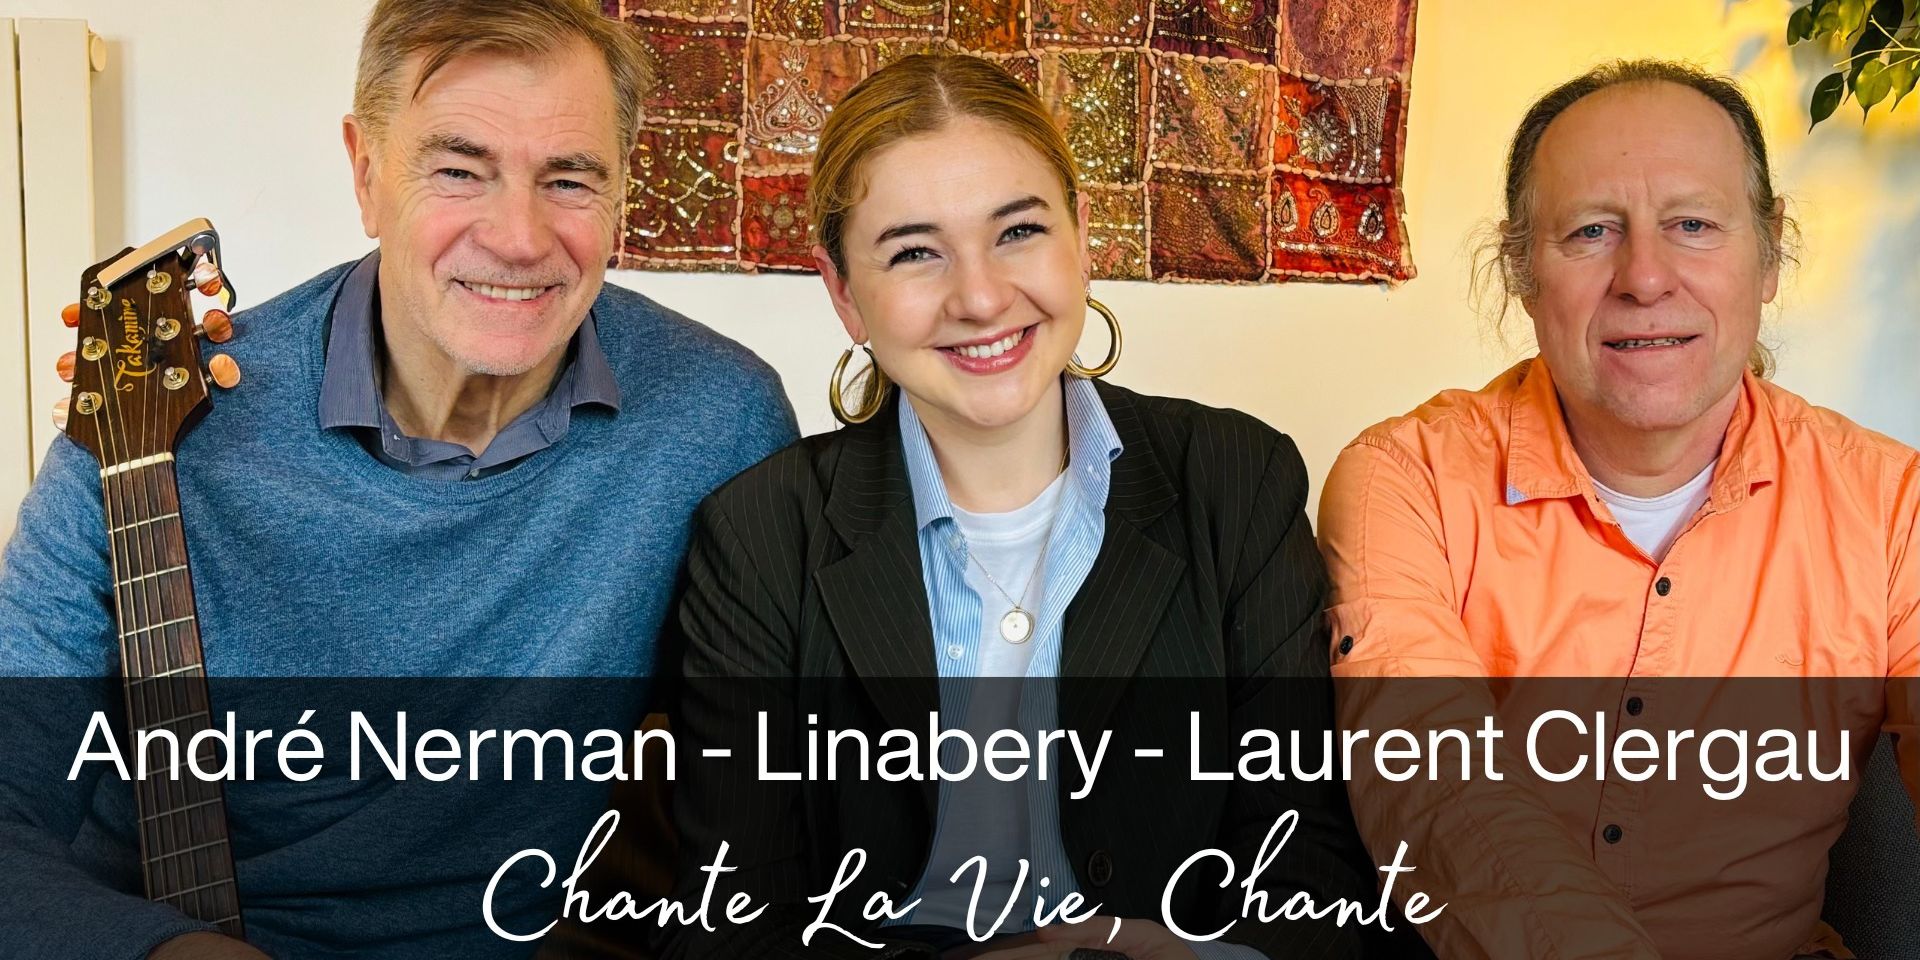 André Nerman - Linabery - Laurent Clergau promotional image